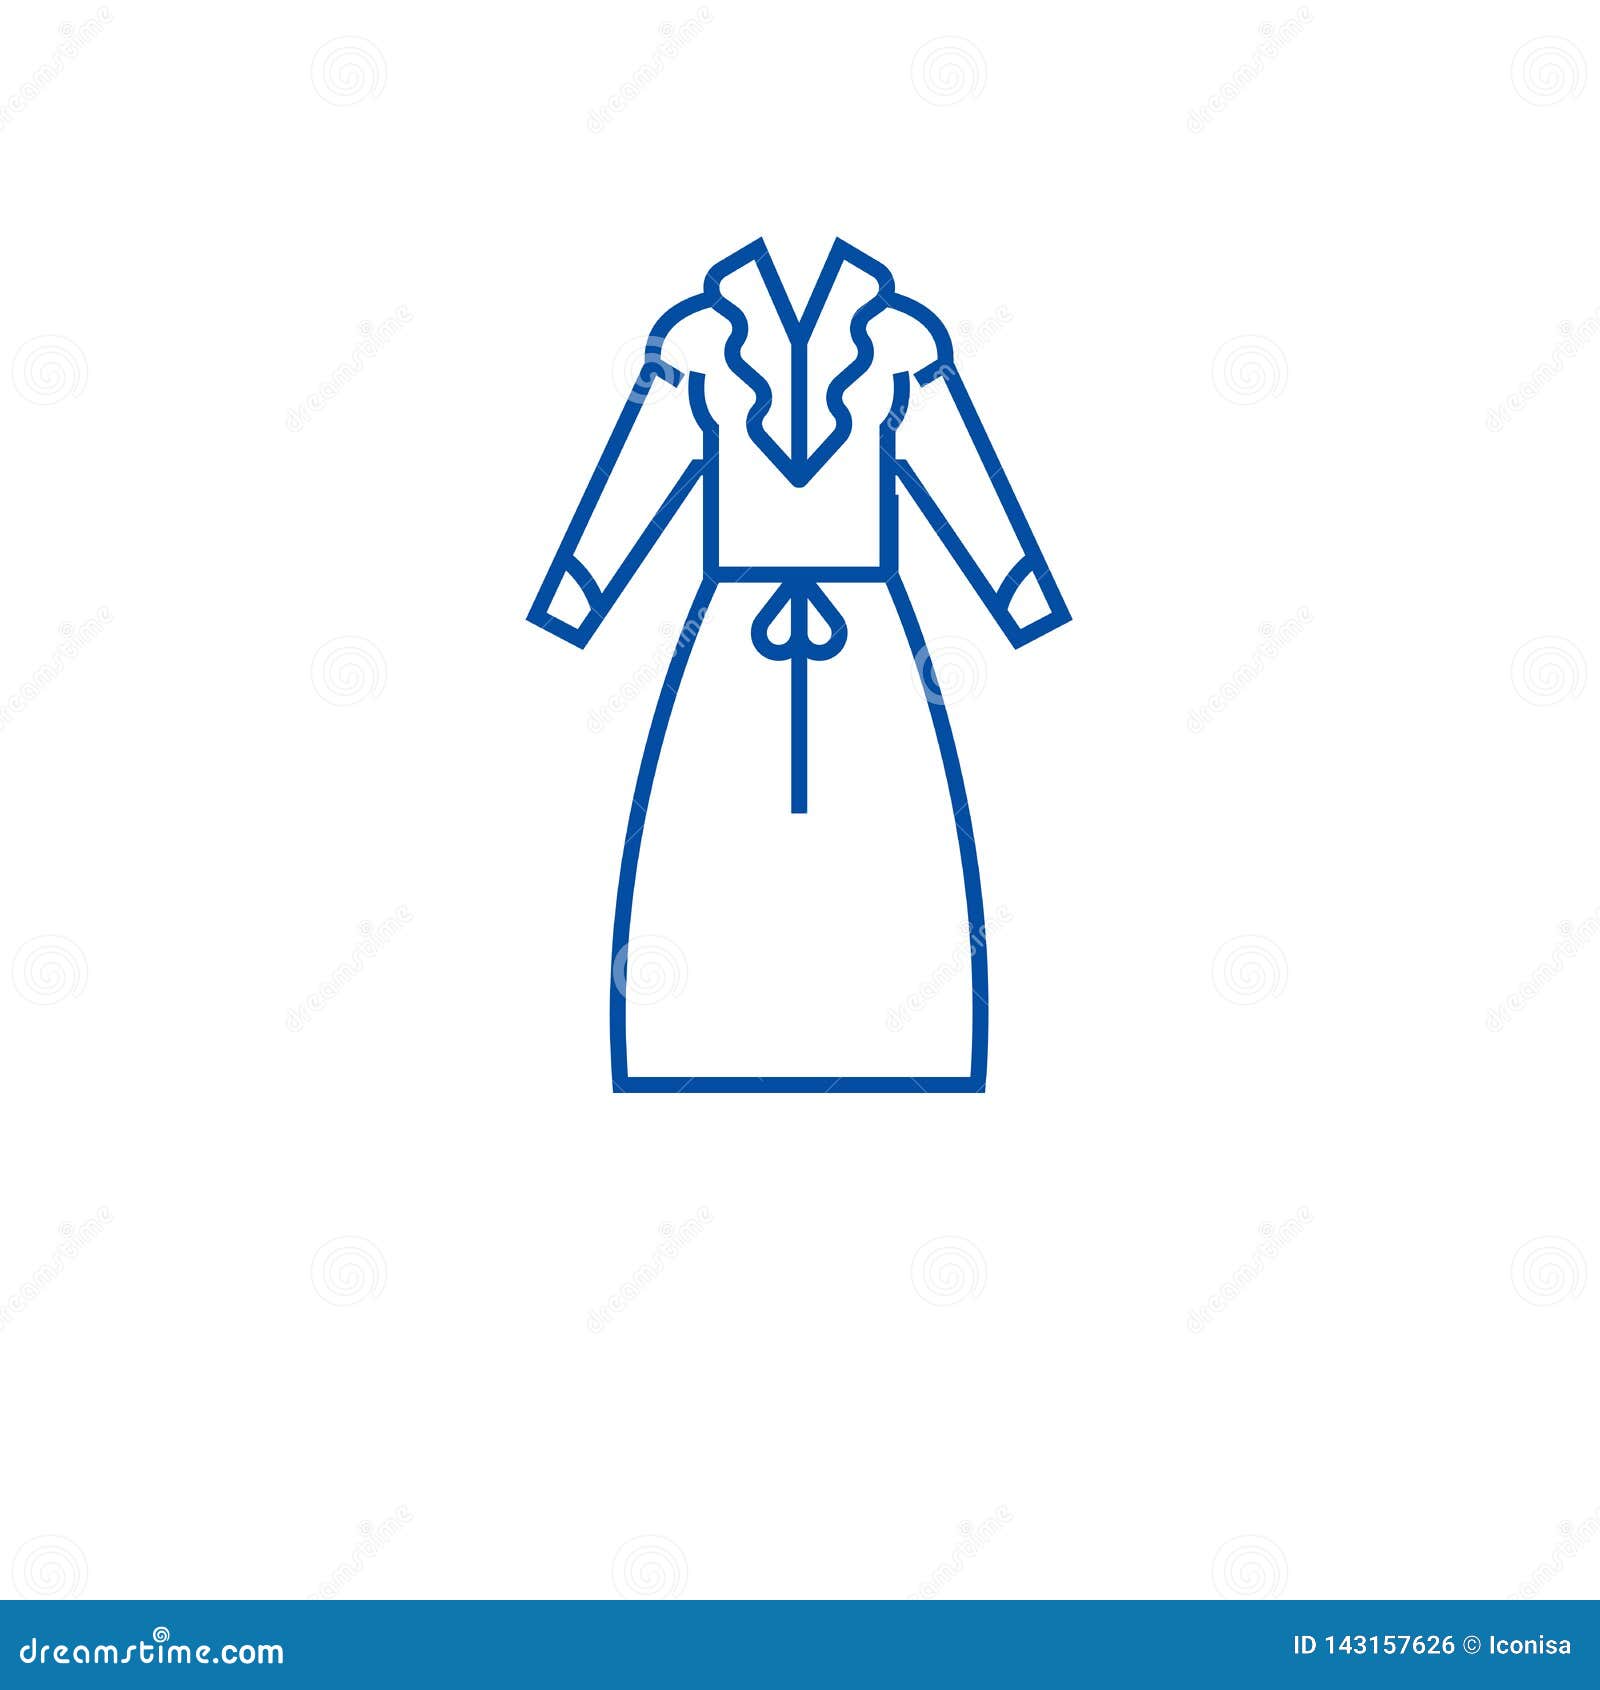 Office Formal Dress Line Icon Concept. Office Formal Dress Flat Vector ...